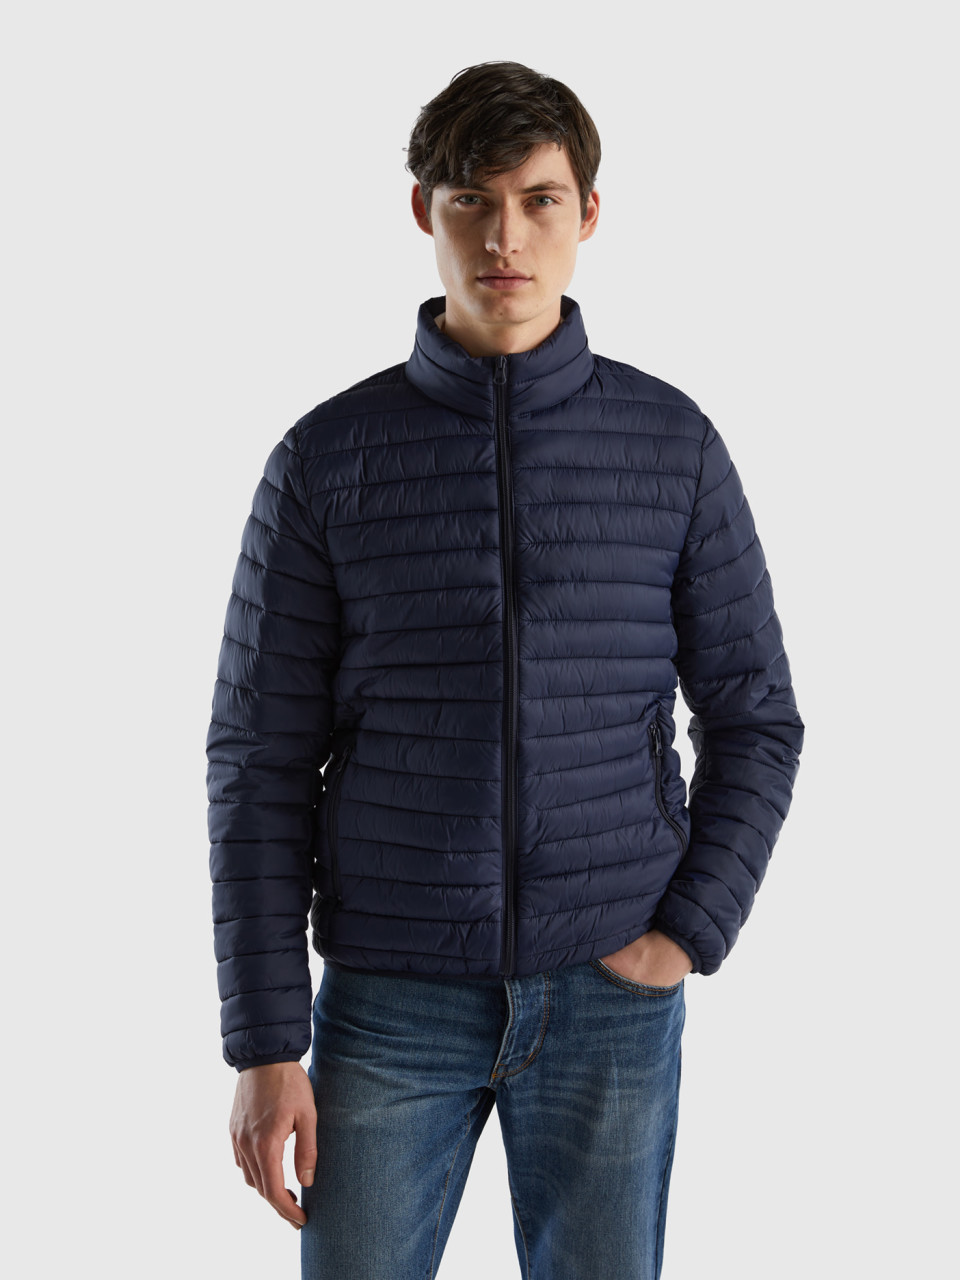 Benetton, Padded Jacket With Recycled Wadding, Dark Blue, Men